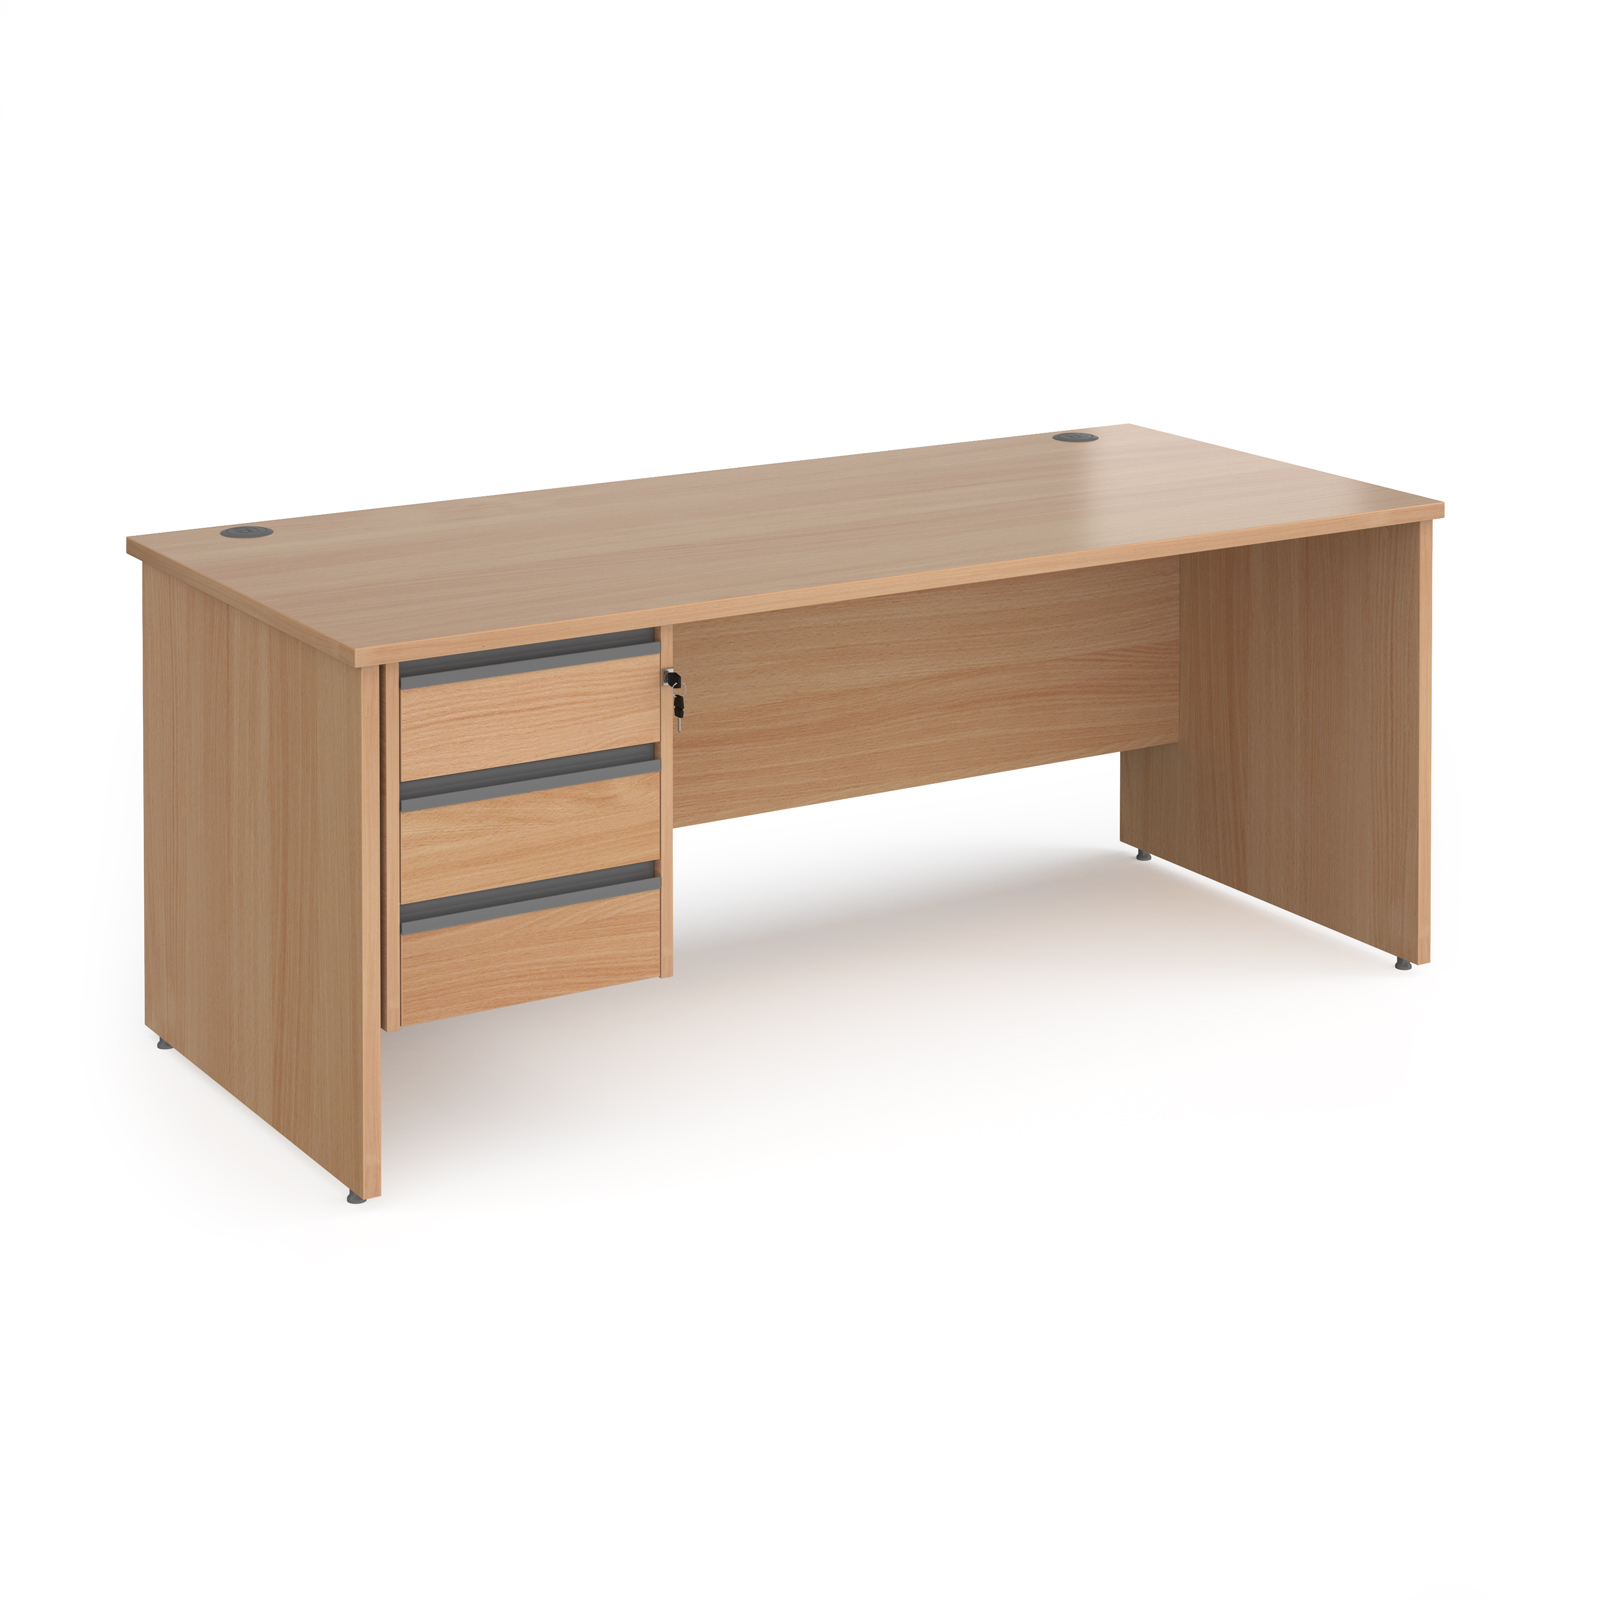 Contract 25 panel leg straight desk with 3 drawer pedestal